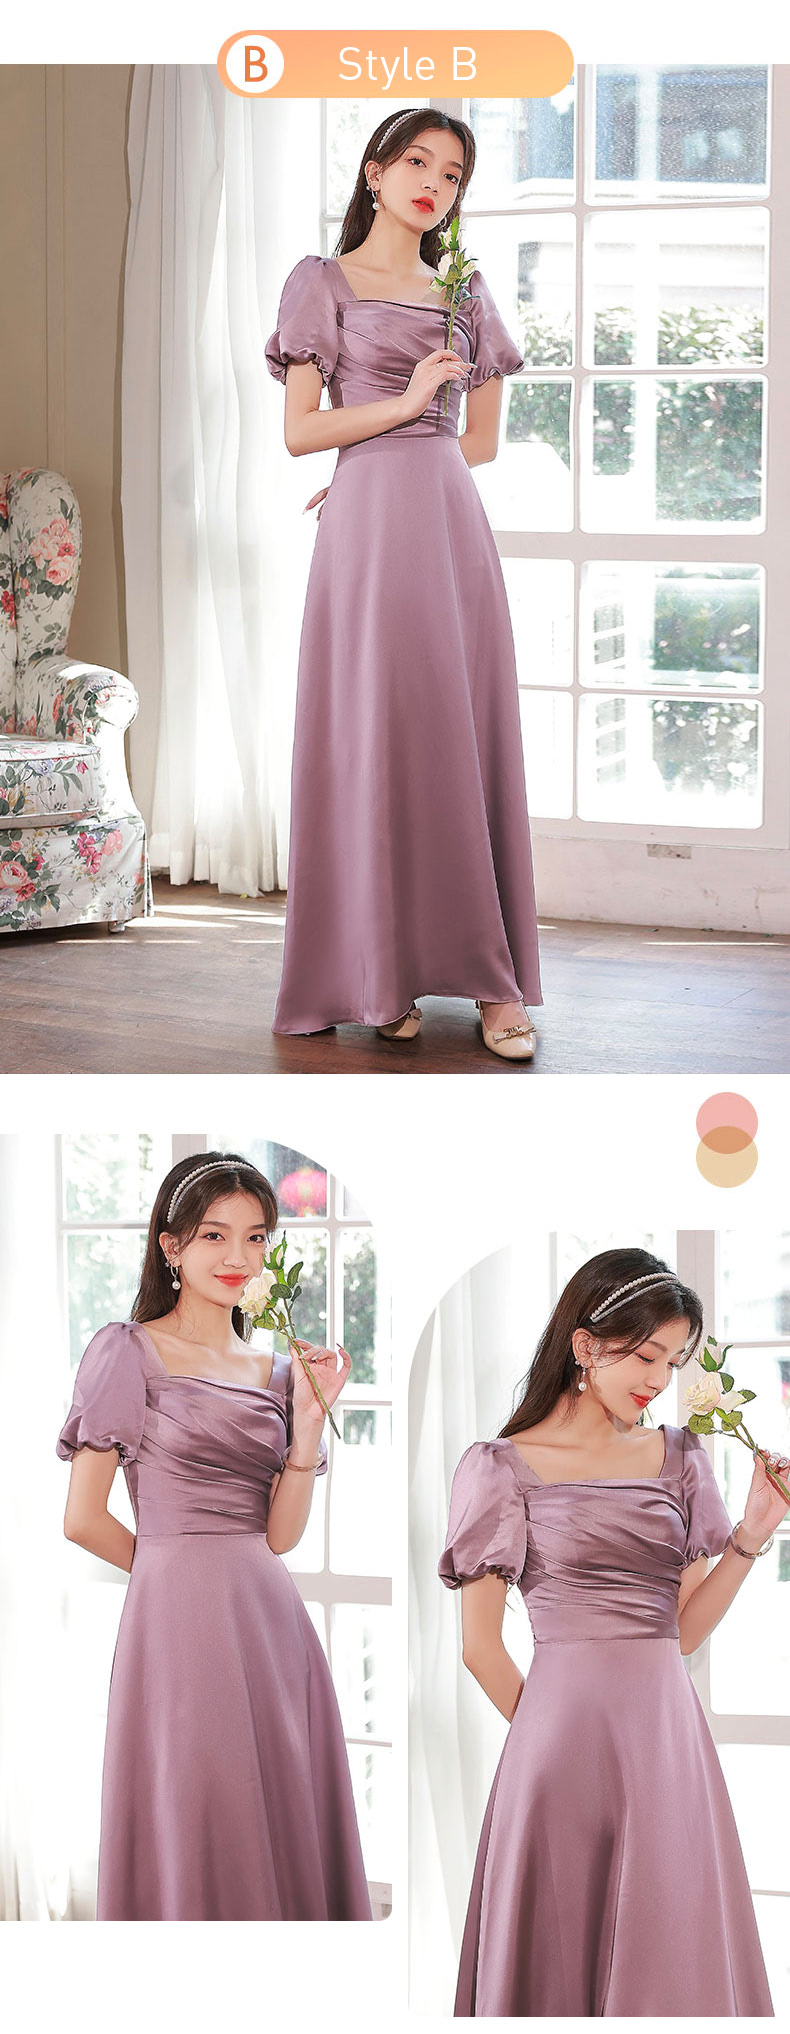 Sweet-Sexy-Purple-Satin-Bridesmaid-Long-Dress-Party-Casual-Ball-Gown16.jpg